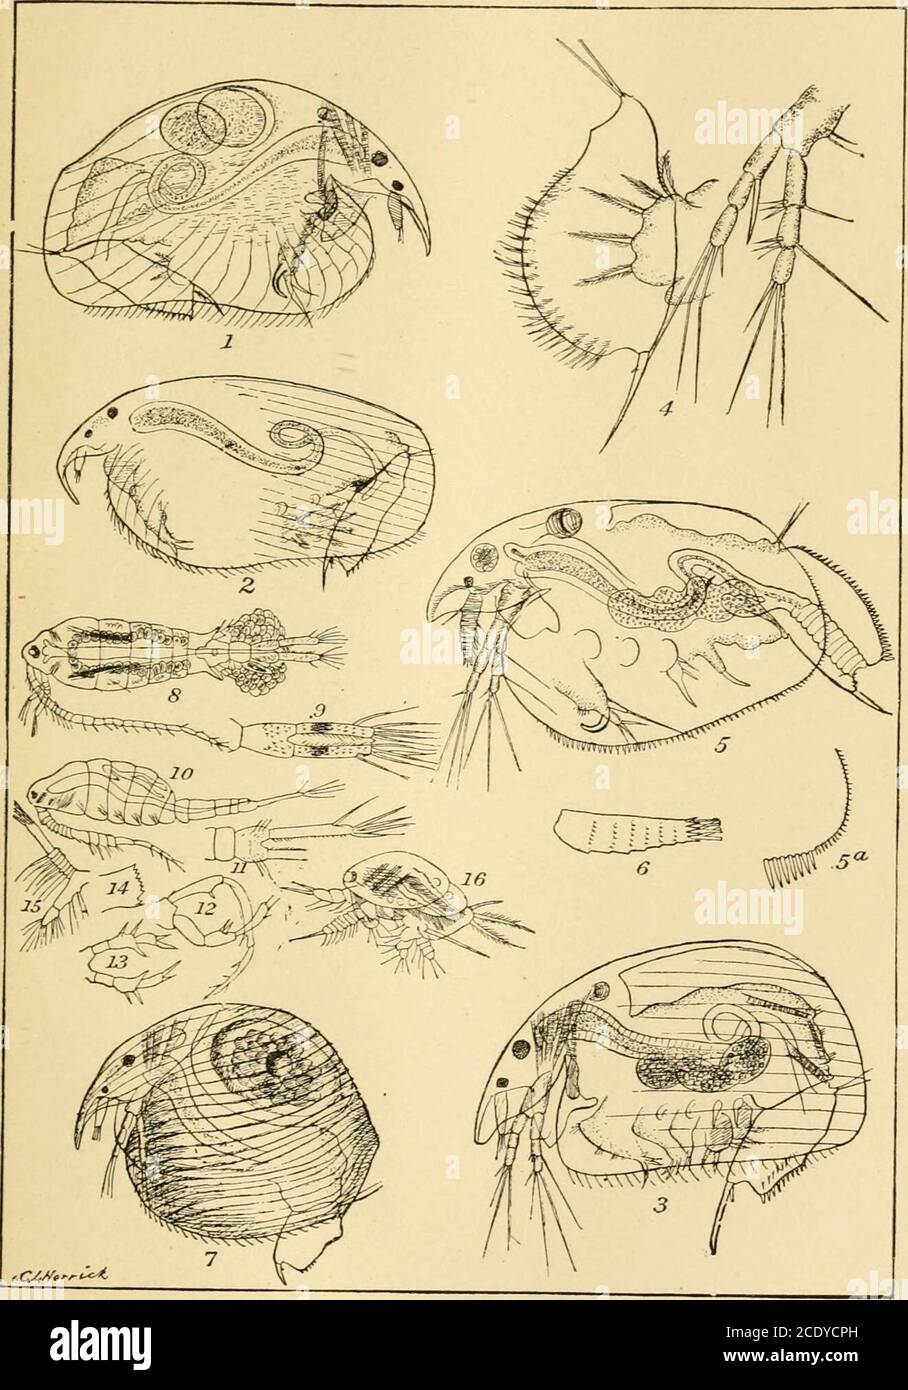 . A final report on the Crustacea of Minnesota, included in the orders Cladocera and Copepoda, together with a synopsis of the described species in North America, and keys to the known species of the more important genera . PLATE H. Fig. 1. Pleuroxus Jmrnatus, post-abdomen and antenna. Fig. 2. Pleuroxus affinis. Fiff. 3. Alona modestu {= lineata?) Fig. 4. Leydigia quadrangularis. Fig. 5. Euri/cercus lamellatus, male; 6&. i^osterior margin. Fig. 6, do, antenna of female. Fig. 7. Ahnella pygmwa. Fig. 8. Temora qfinis, Foppe. female. Jfig, 9. do., abdomen of female. Fig. 10. do,, male. Fig. 11. d Stock Photo